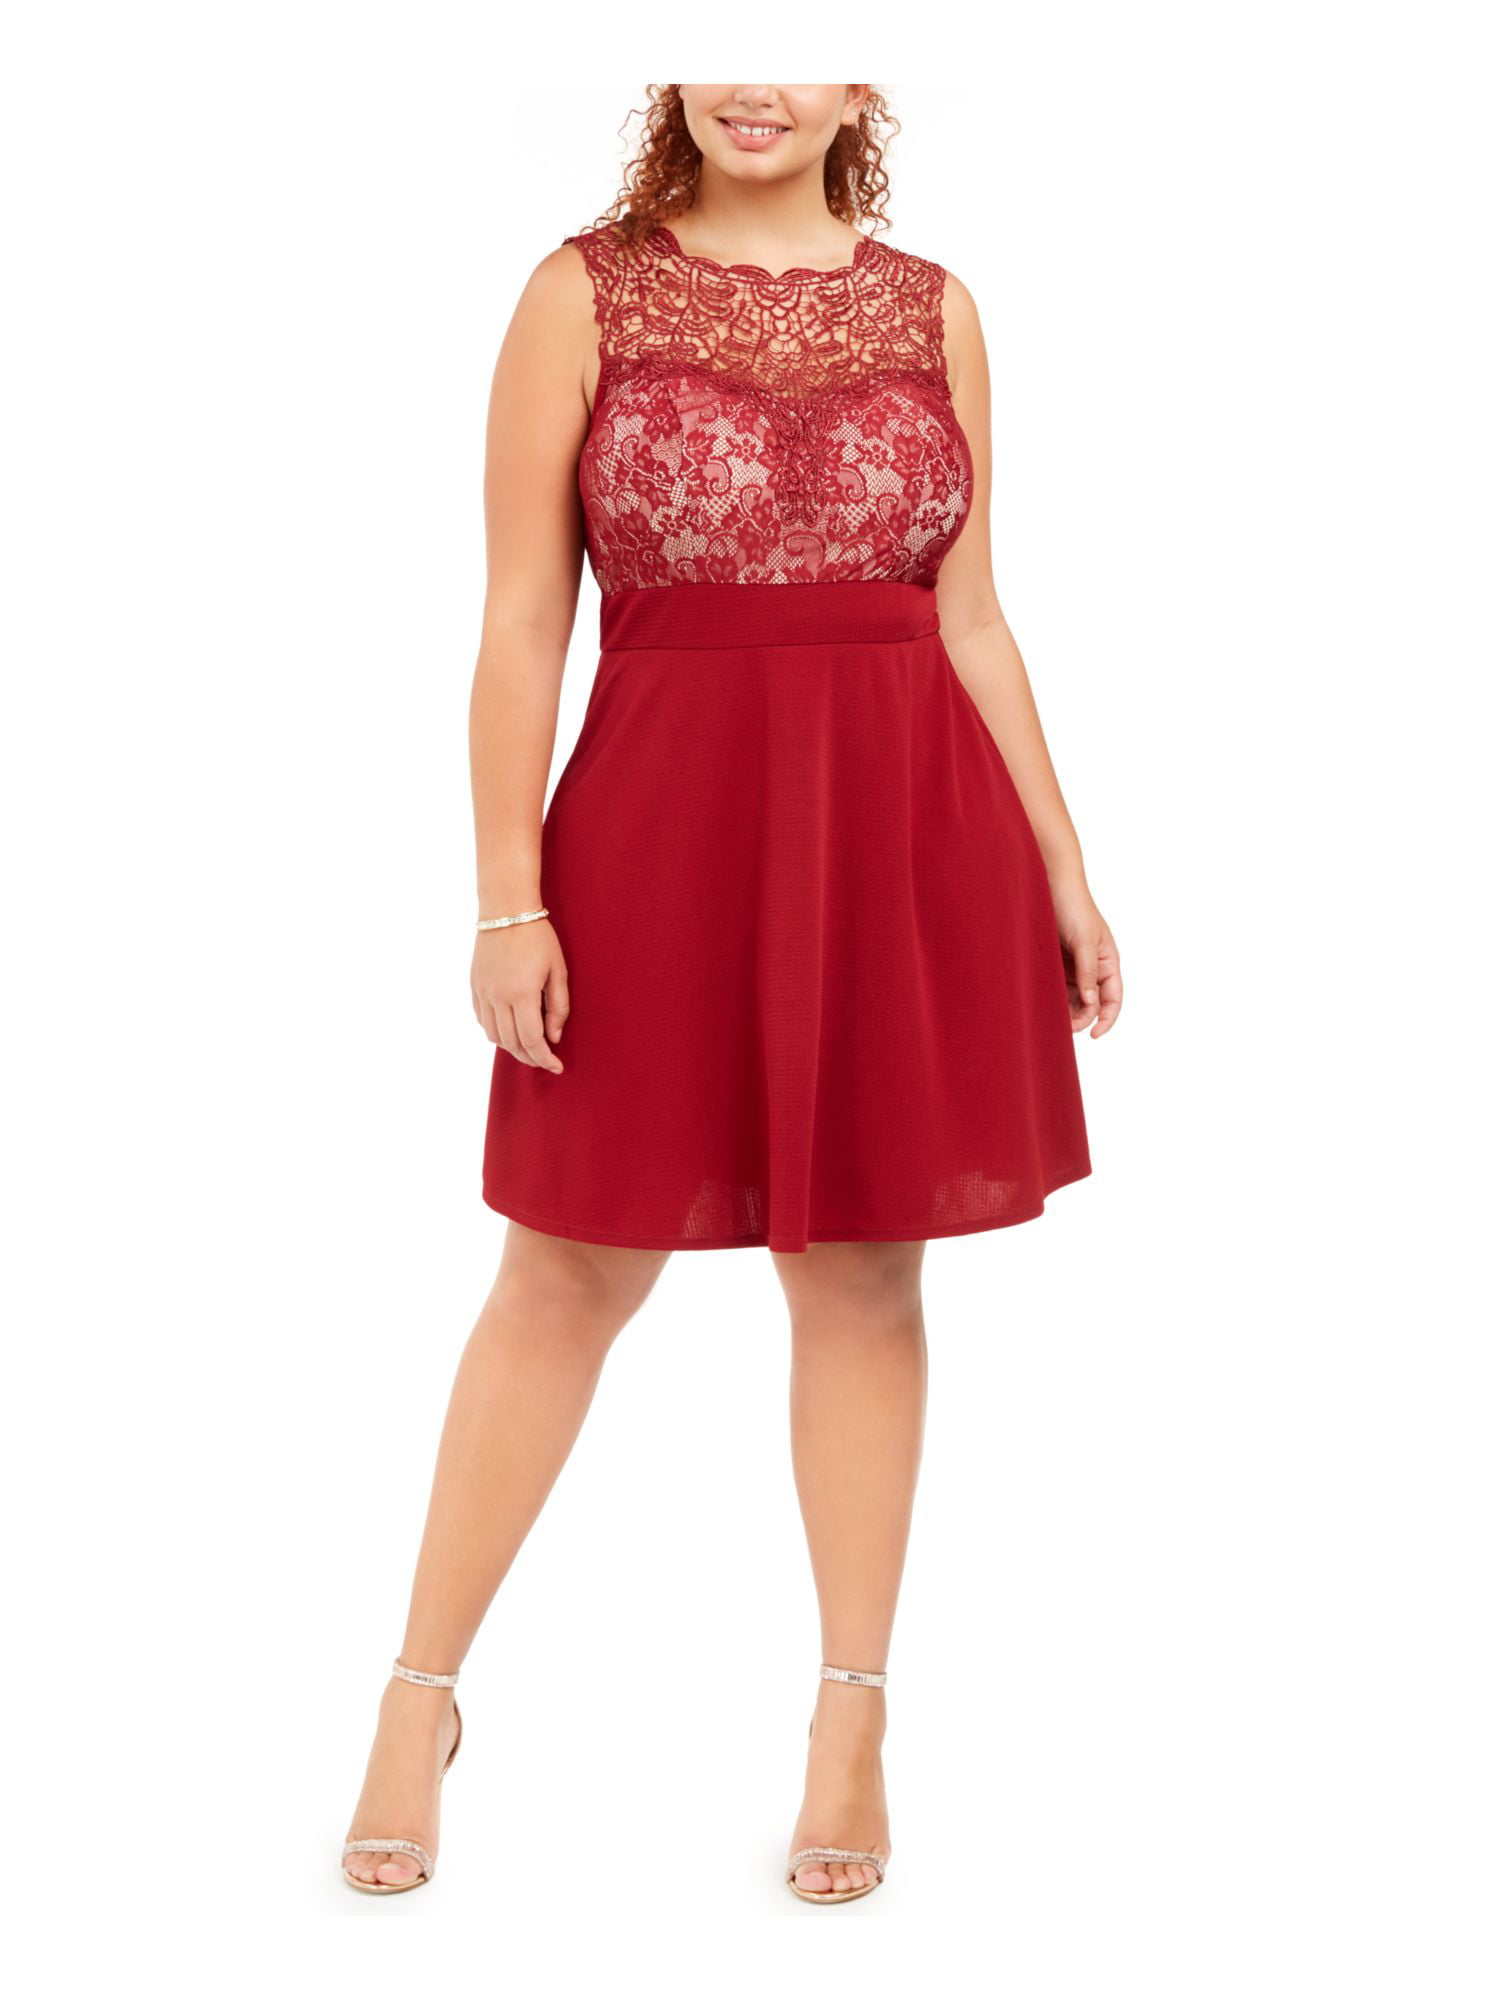 Love Womens Lace Textured Party Dress Red 1X - Walmart.com